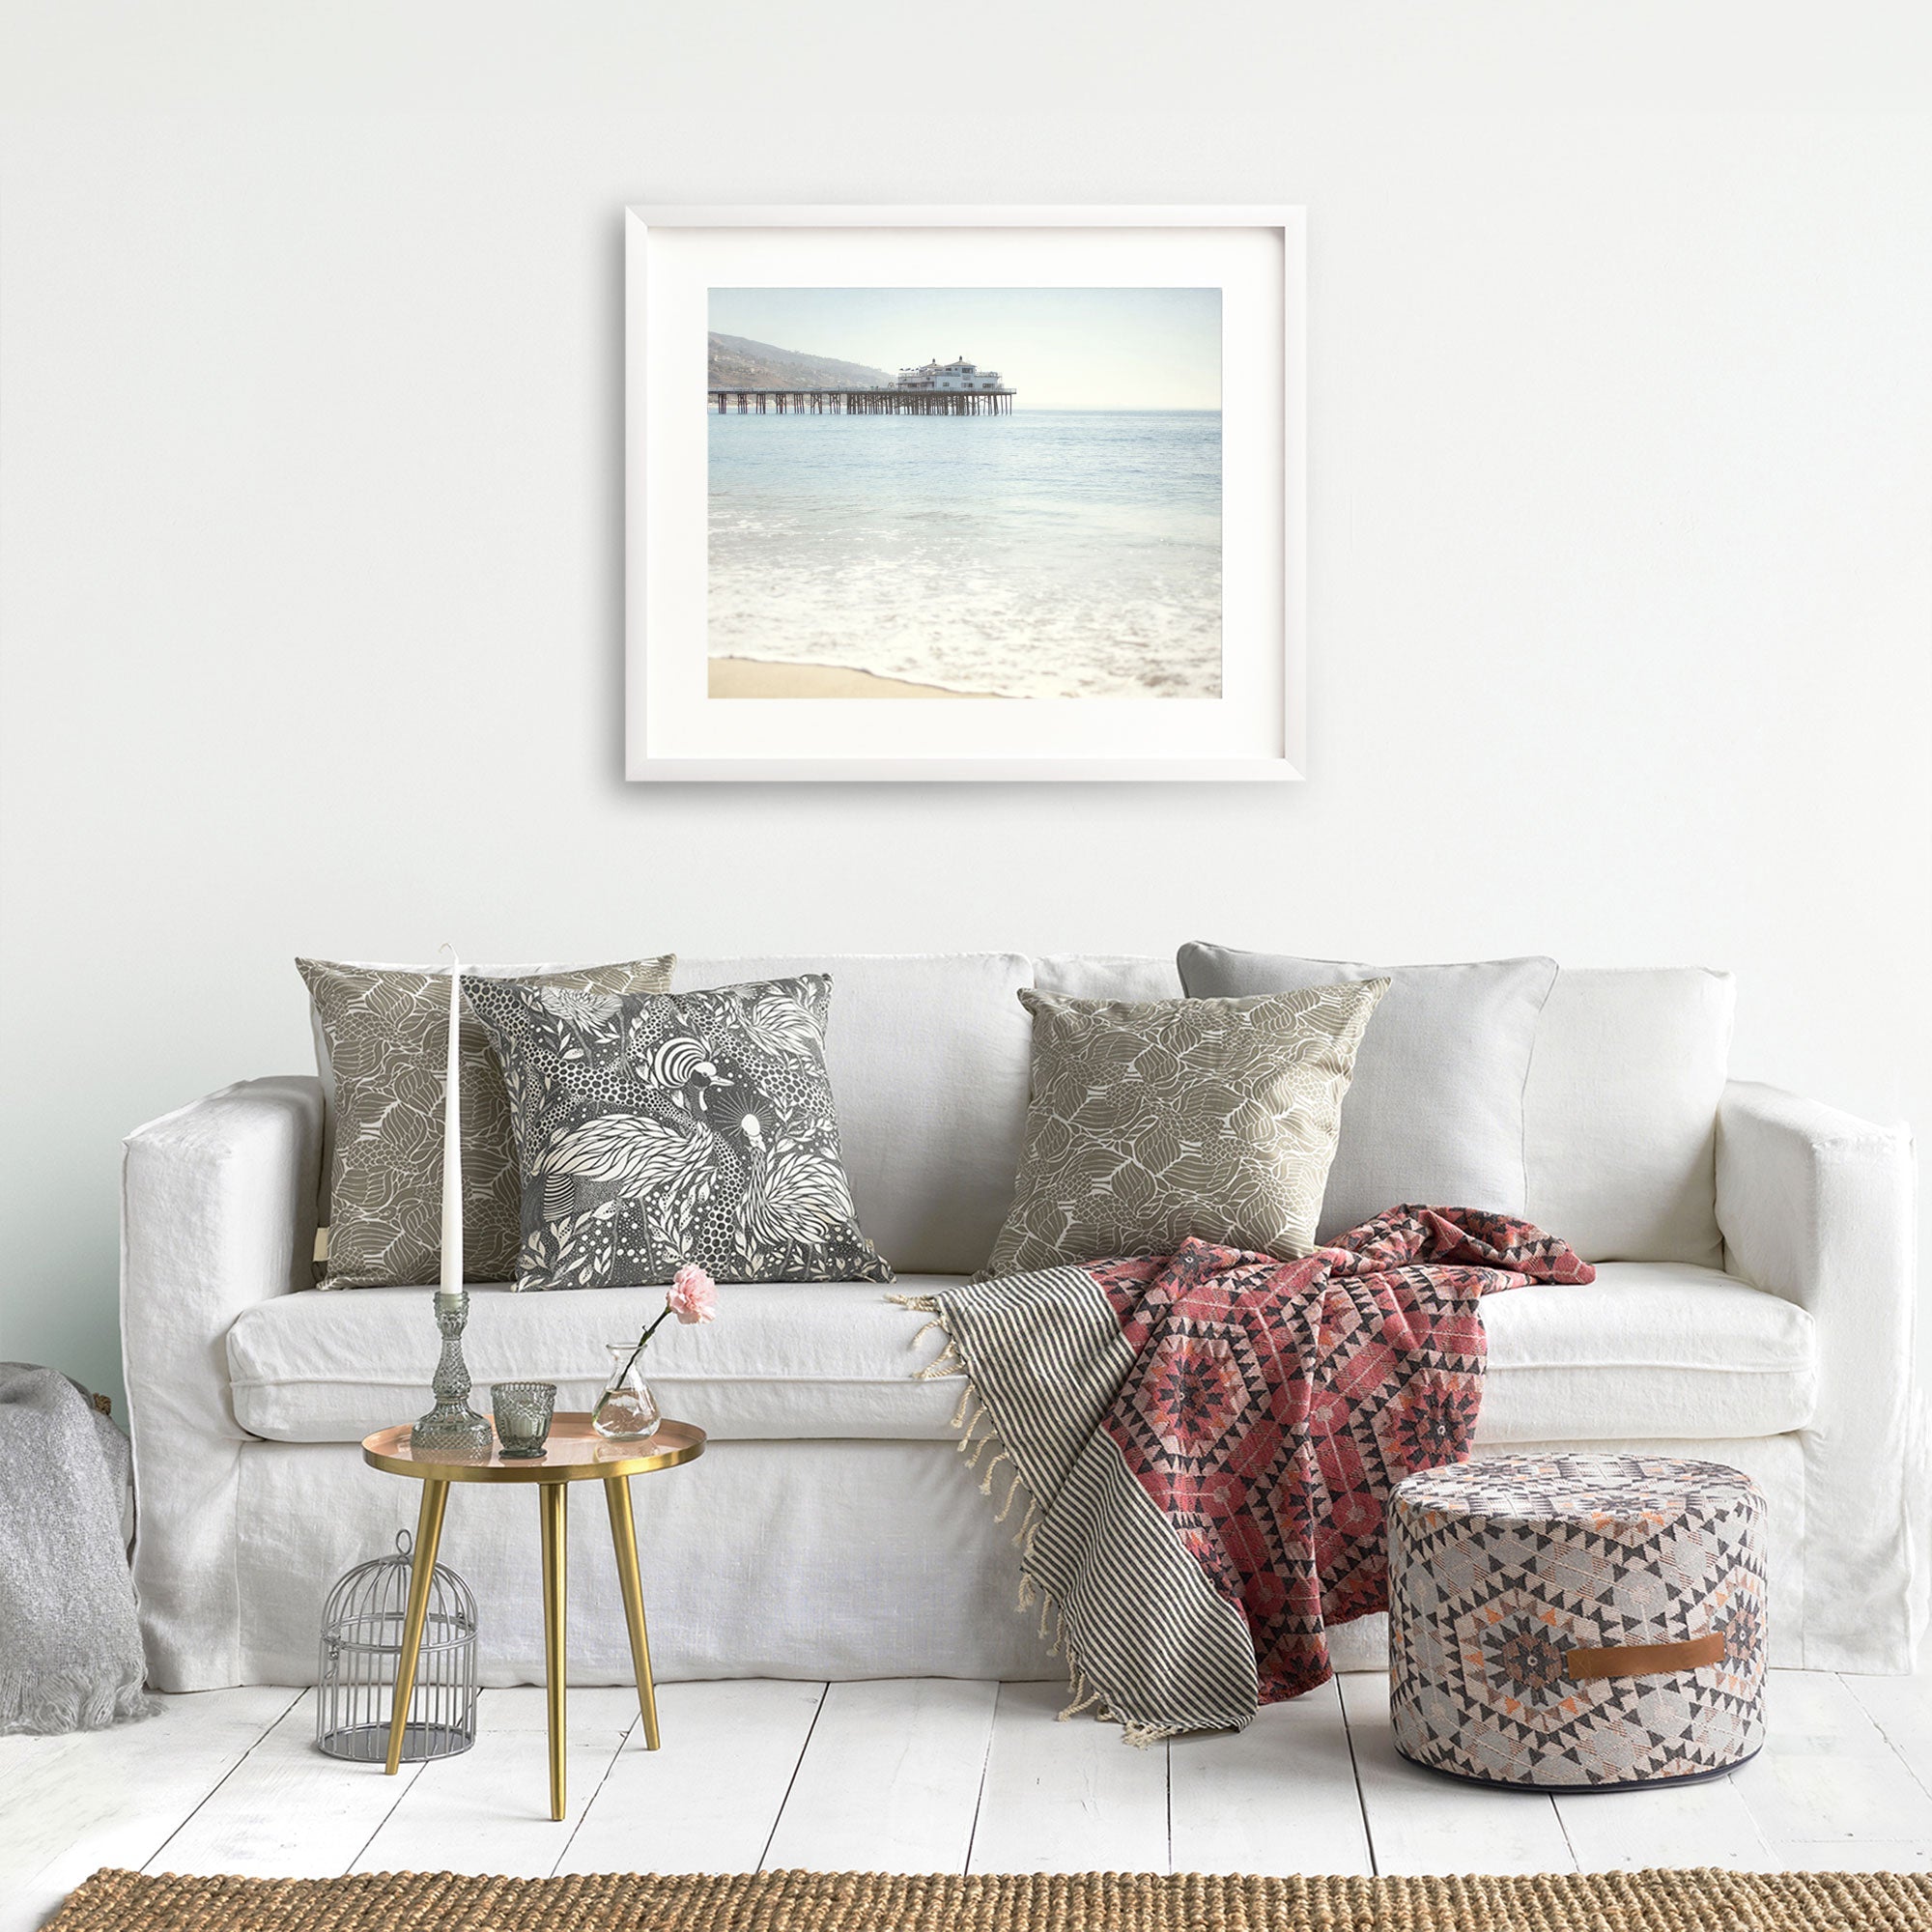 A modern living room featuring a white sofa adorned with patterned cushions, a cozy red blanket, and a small gold side table. On the wall above the sofa hangs a framed photo of California Beach Print by Offley Green.